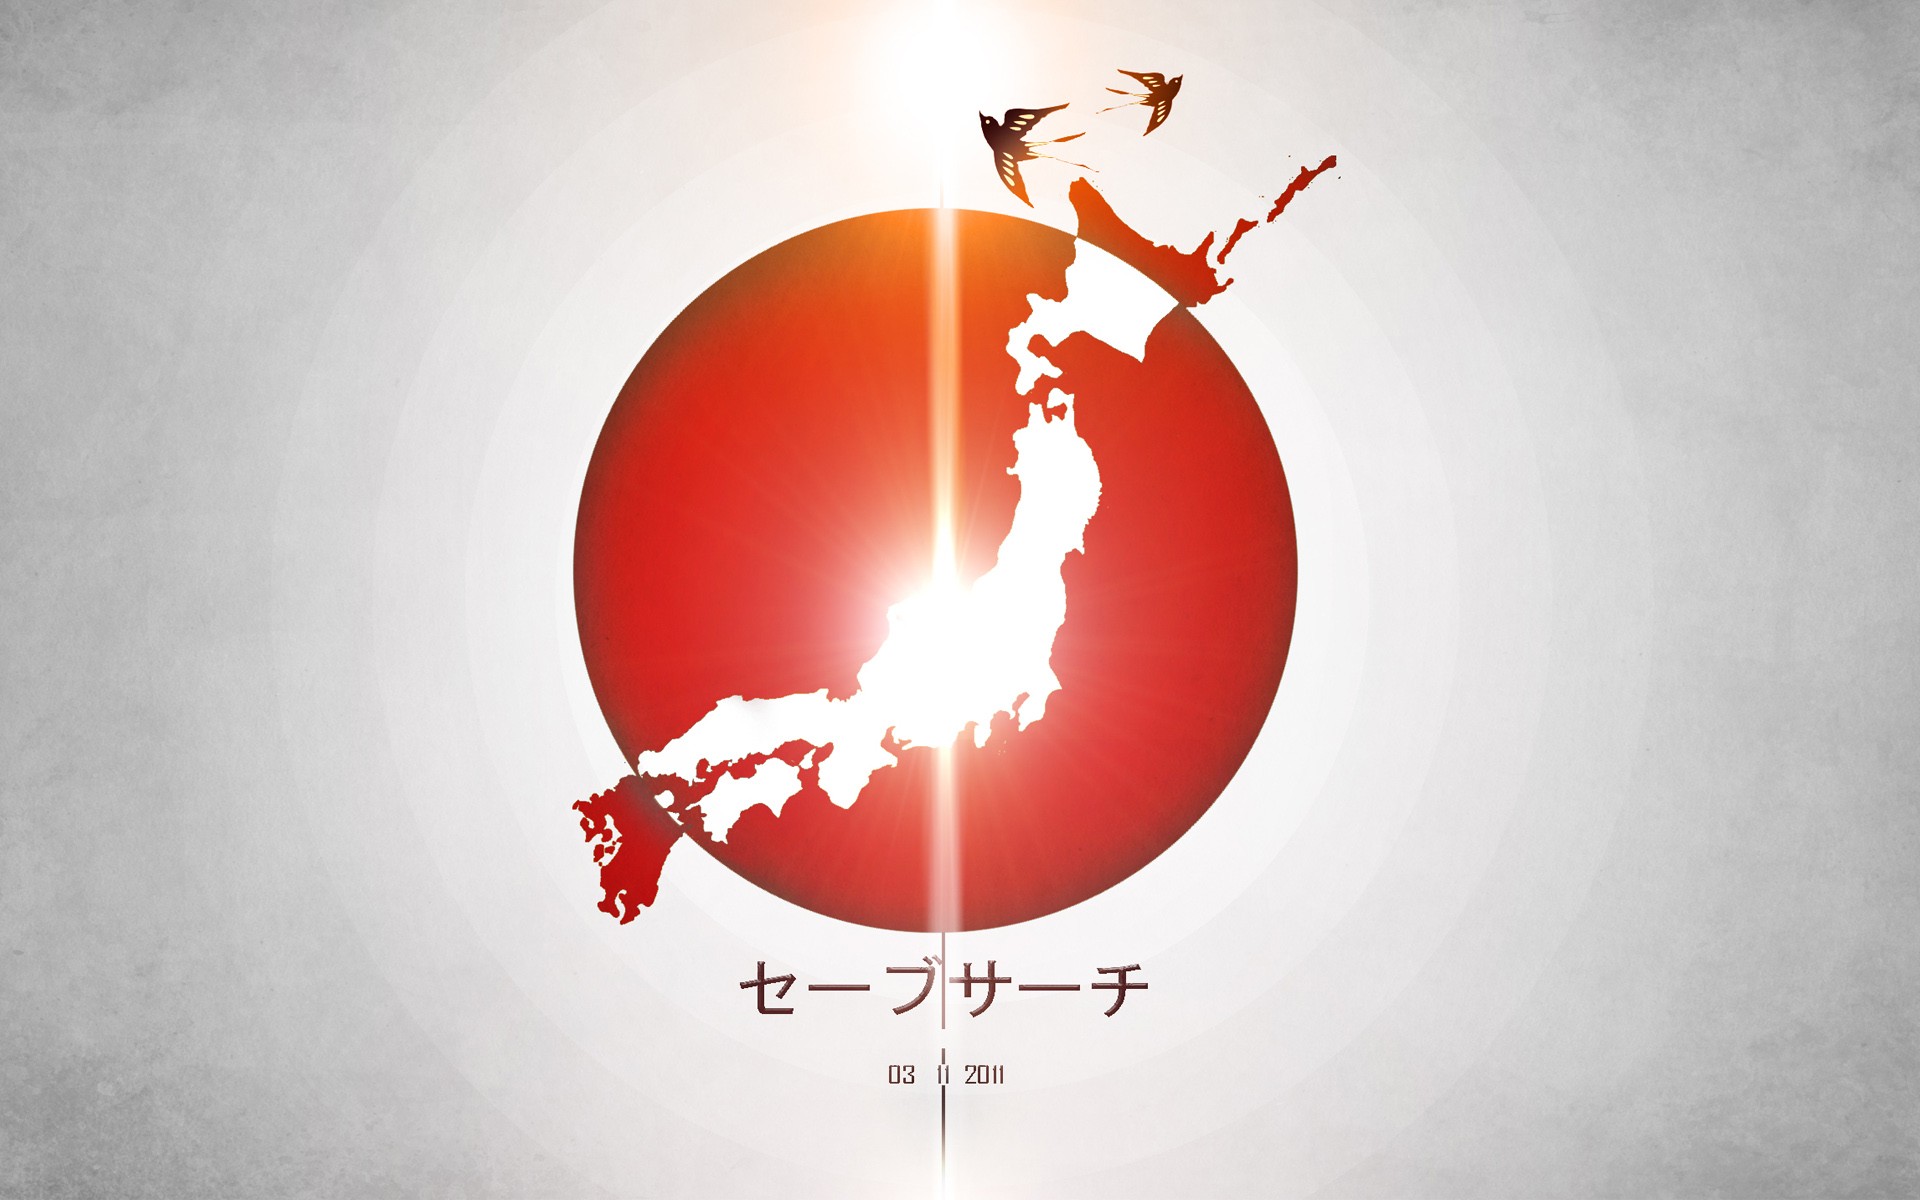 General 1920x1200 Japan 2011 (Year) Asia simple background red artwork circle